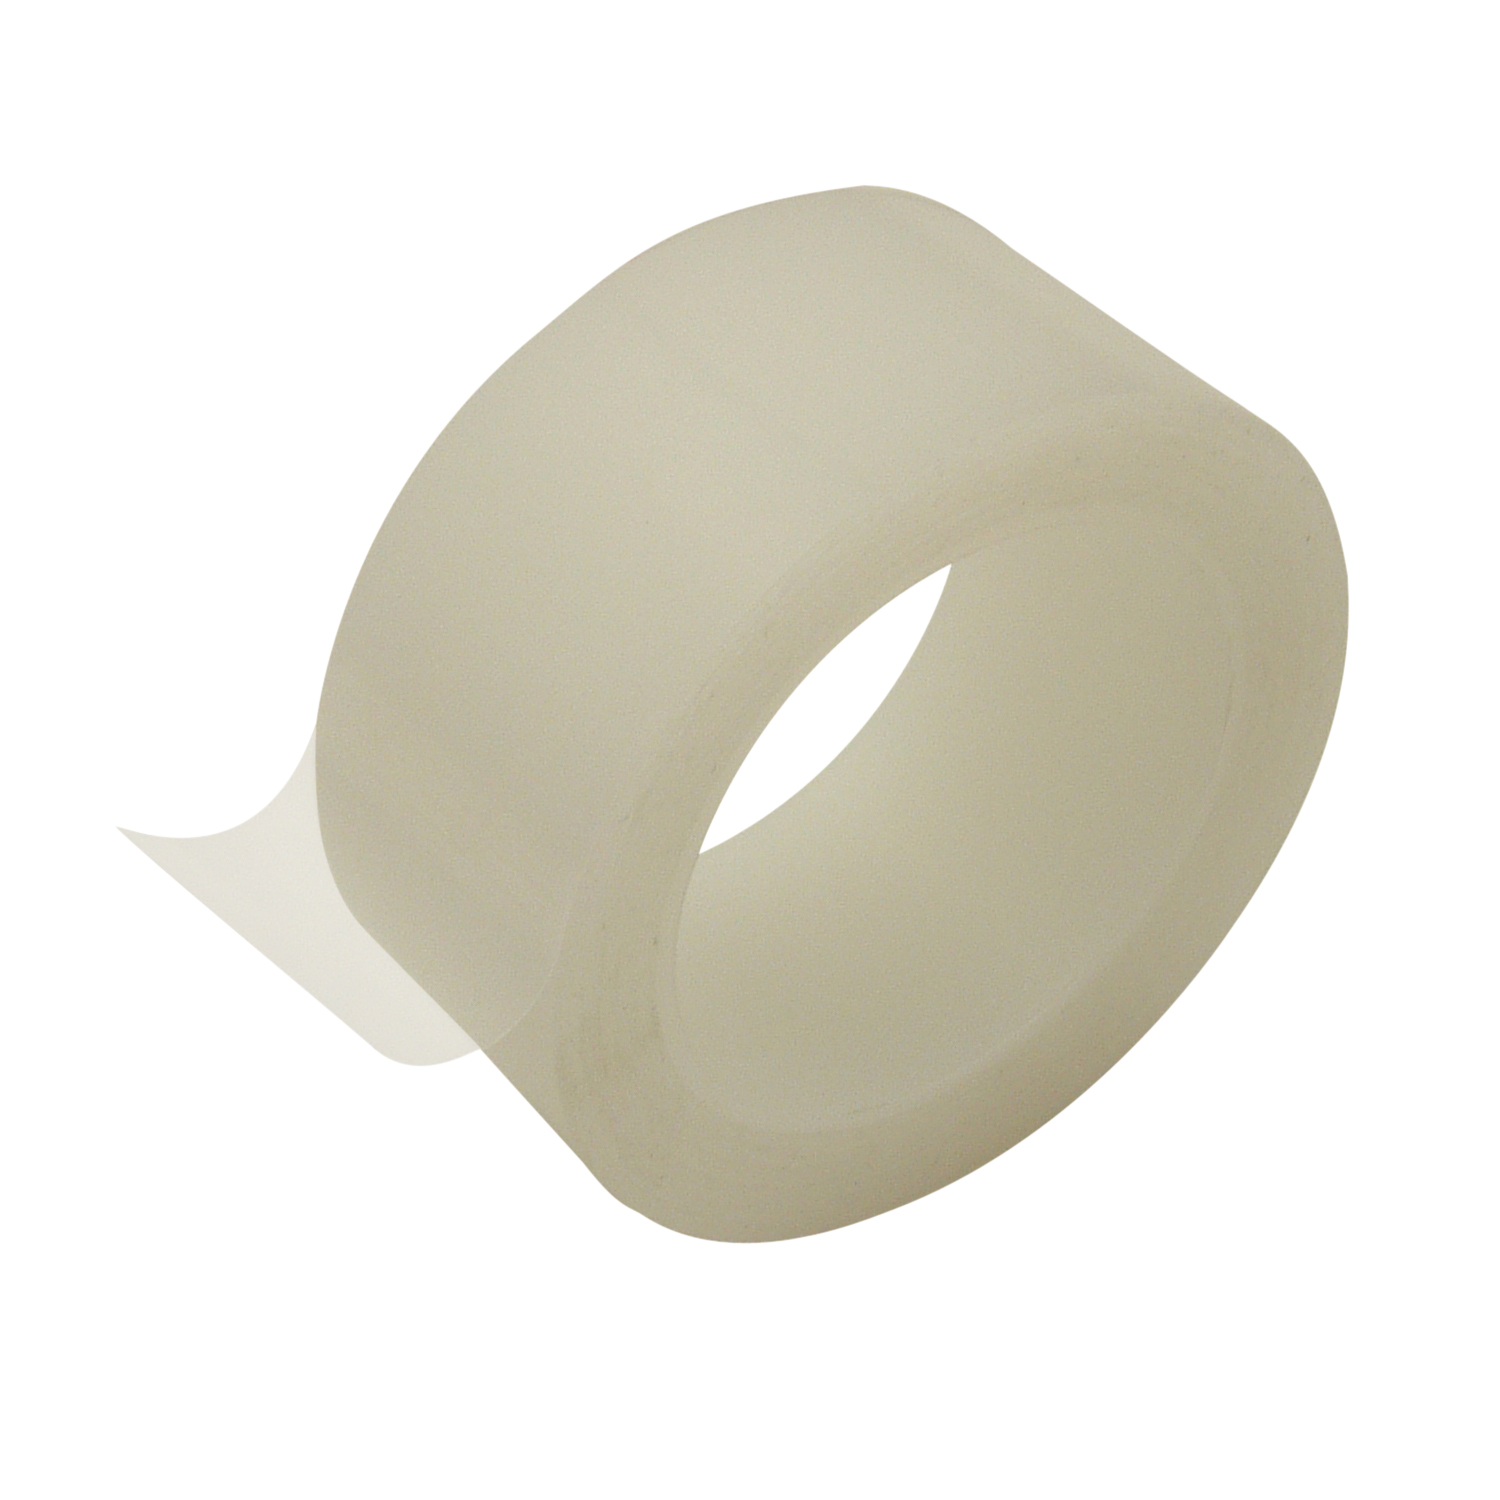 Patco Polyethylene Clean Removal Tape (560)